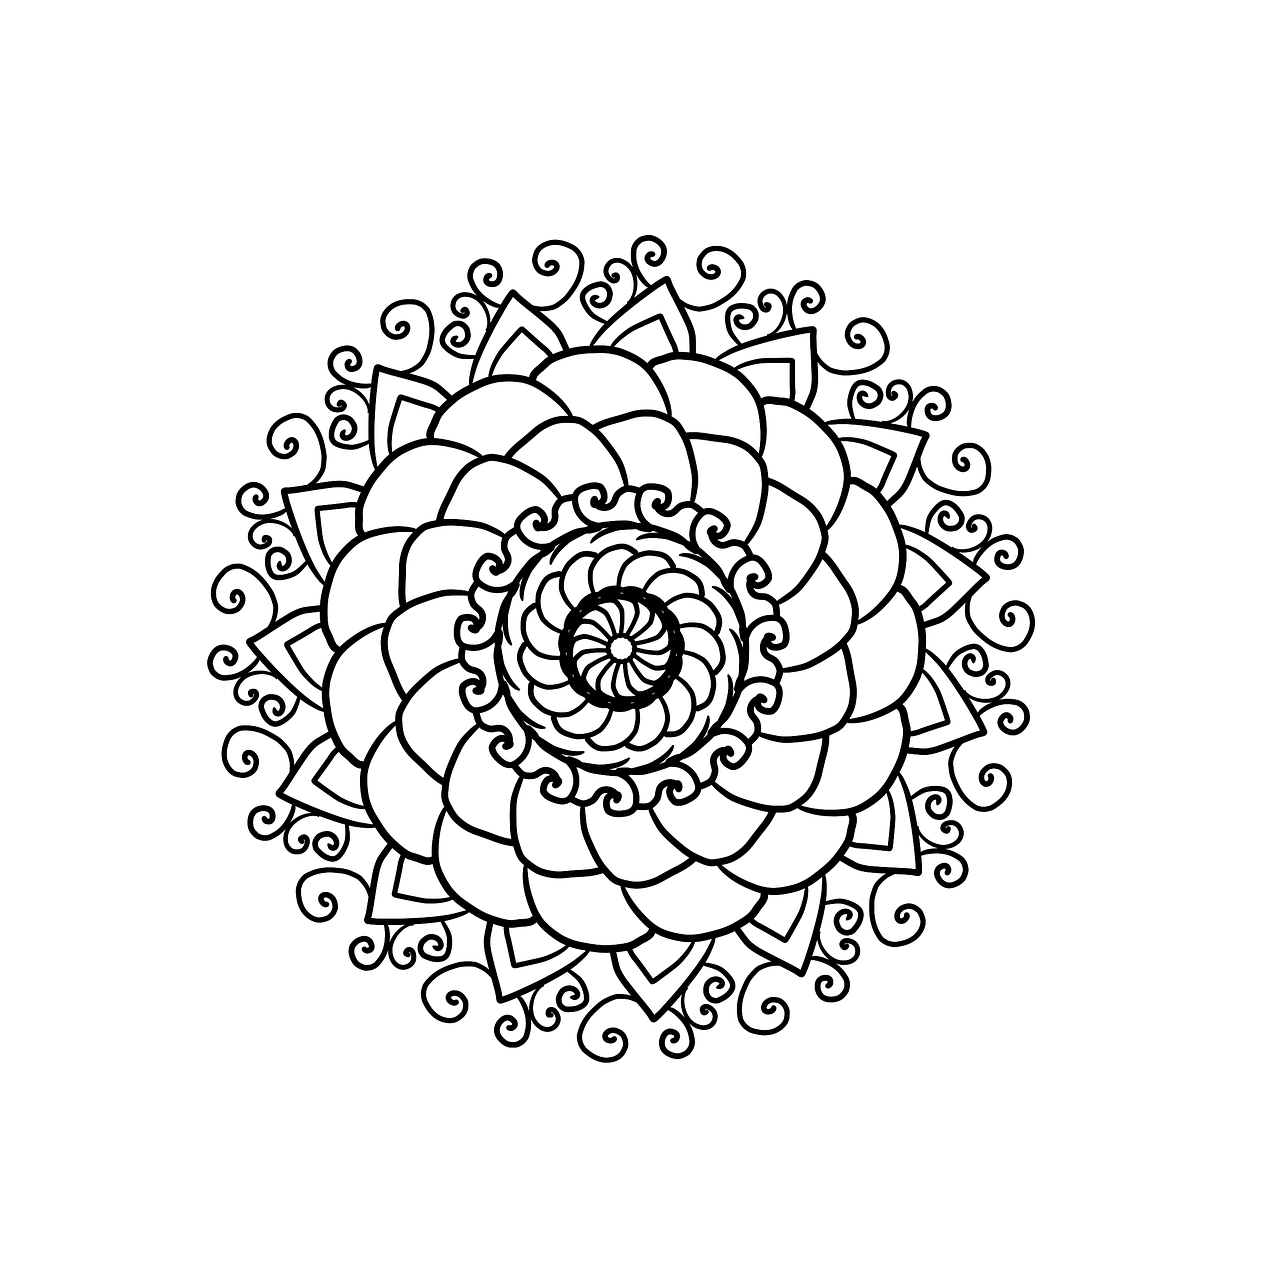 An intricate mandala-style design in black and white.